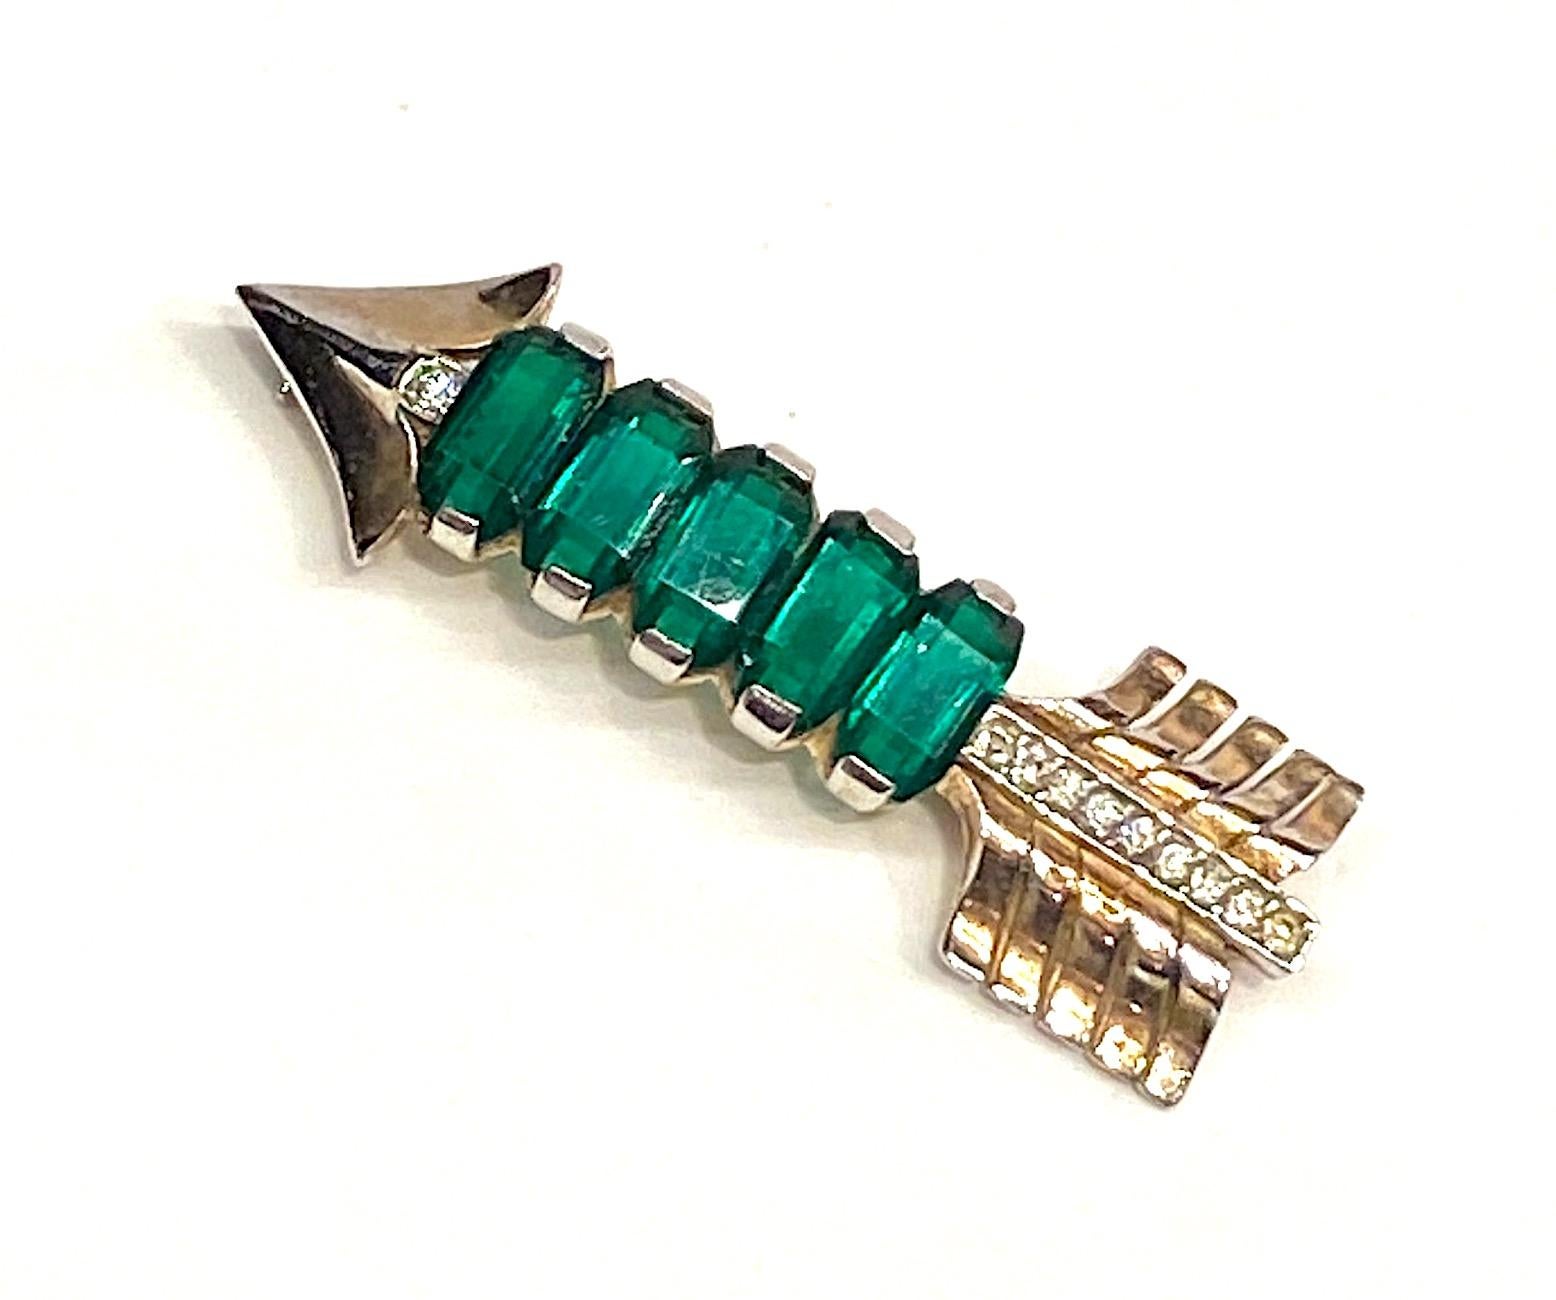 A lovely vintage sterling silver vermeil arrow pin brooch that was featured in Women's Wear Daily on February 24, 1943. This piece was designed by Solomon Finkelstein for Reja in 1943. It is set with five open back rectangular faceted emerald color